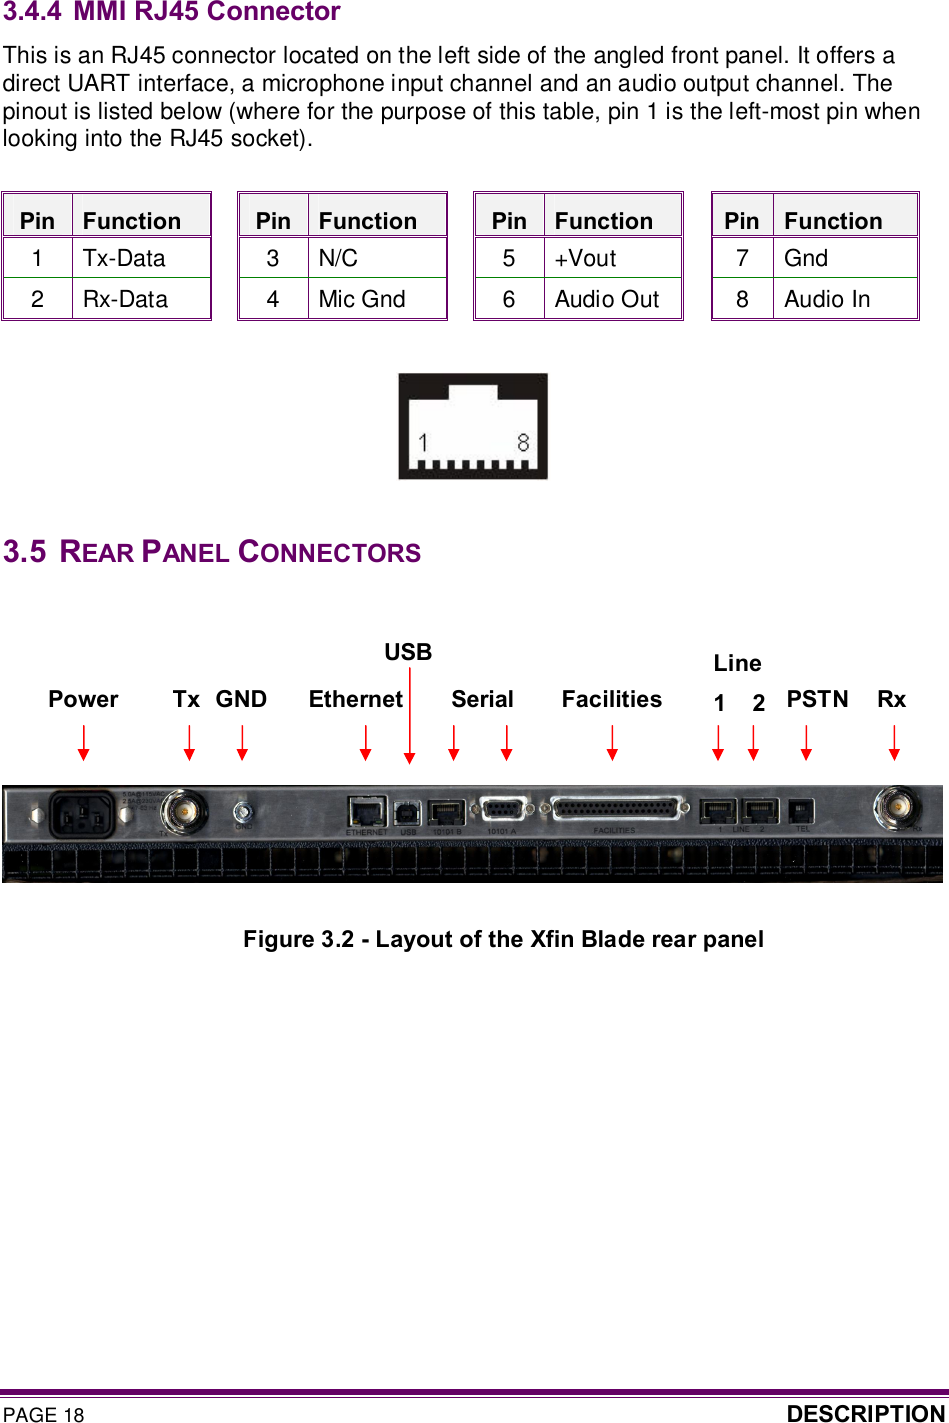 PAGE 18  DESCRIPTION  3.4.4 MMI RJ45 Connector This is an RJ45 connector located on the left side of the angled front panel. It offers a direct UART interface, a microphone input channel and an audio output channel. The pinout is listed below (where for the purpose of this table, pin 1 is the left-most pin when looking into the RJ45 socket).  Pin  Function  Pin  Function  Pin  Function  Pin  Function 1  Tx-Data  3  N/C  5  +Vout  7  Gnd 2  Rx-Data  4  Mic Gnd  6  Audio Out  8  Audio In    3.5  REAR PANEL CONNECTORS            Figure 3.2 - Layout of the Xfin Blade rear panel Tx Power      GND Ethernet  Serial Facilities   Line   1    2  PSTN  Rx USB 